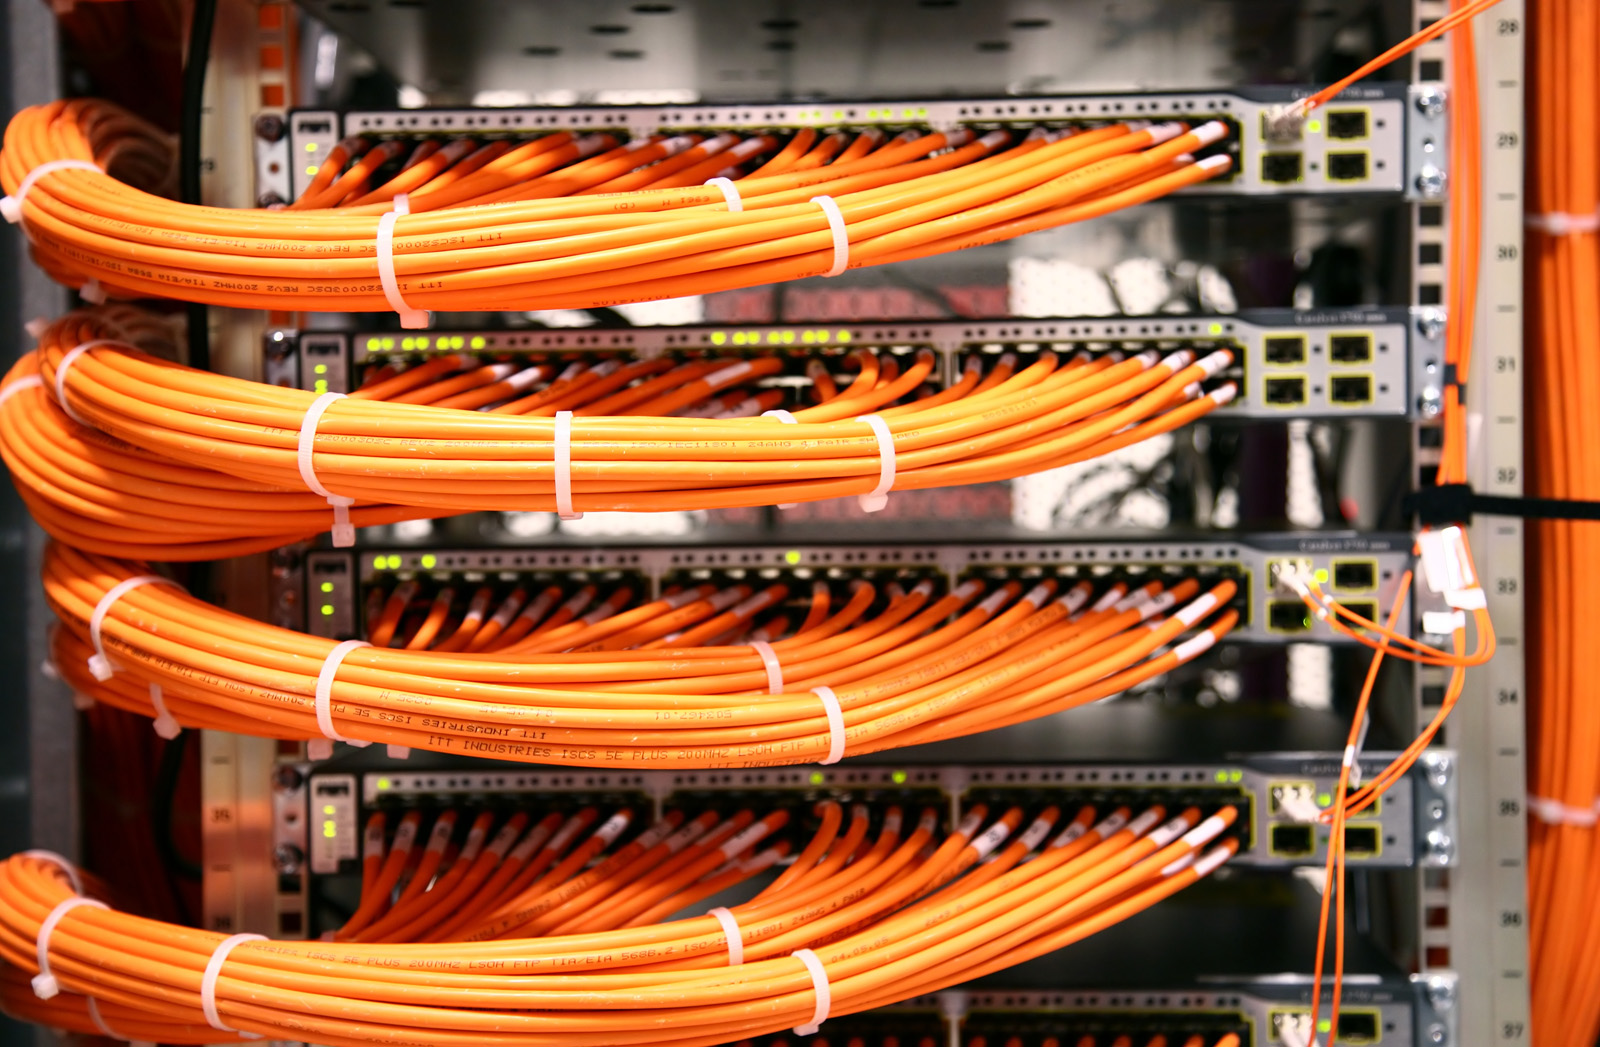 Mount Vernon KYs Top Choice Voice & Data Networking Cabling Solutions